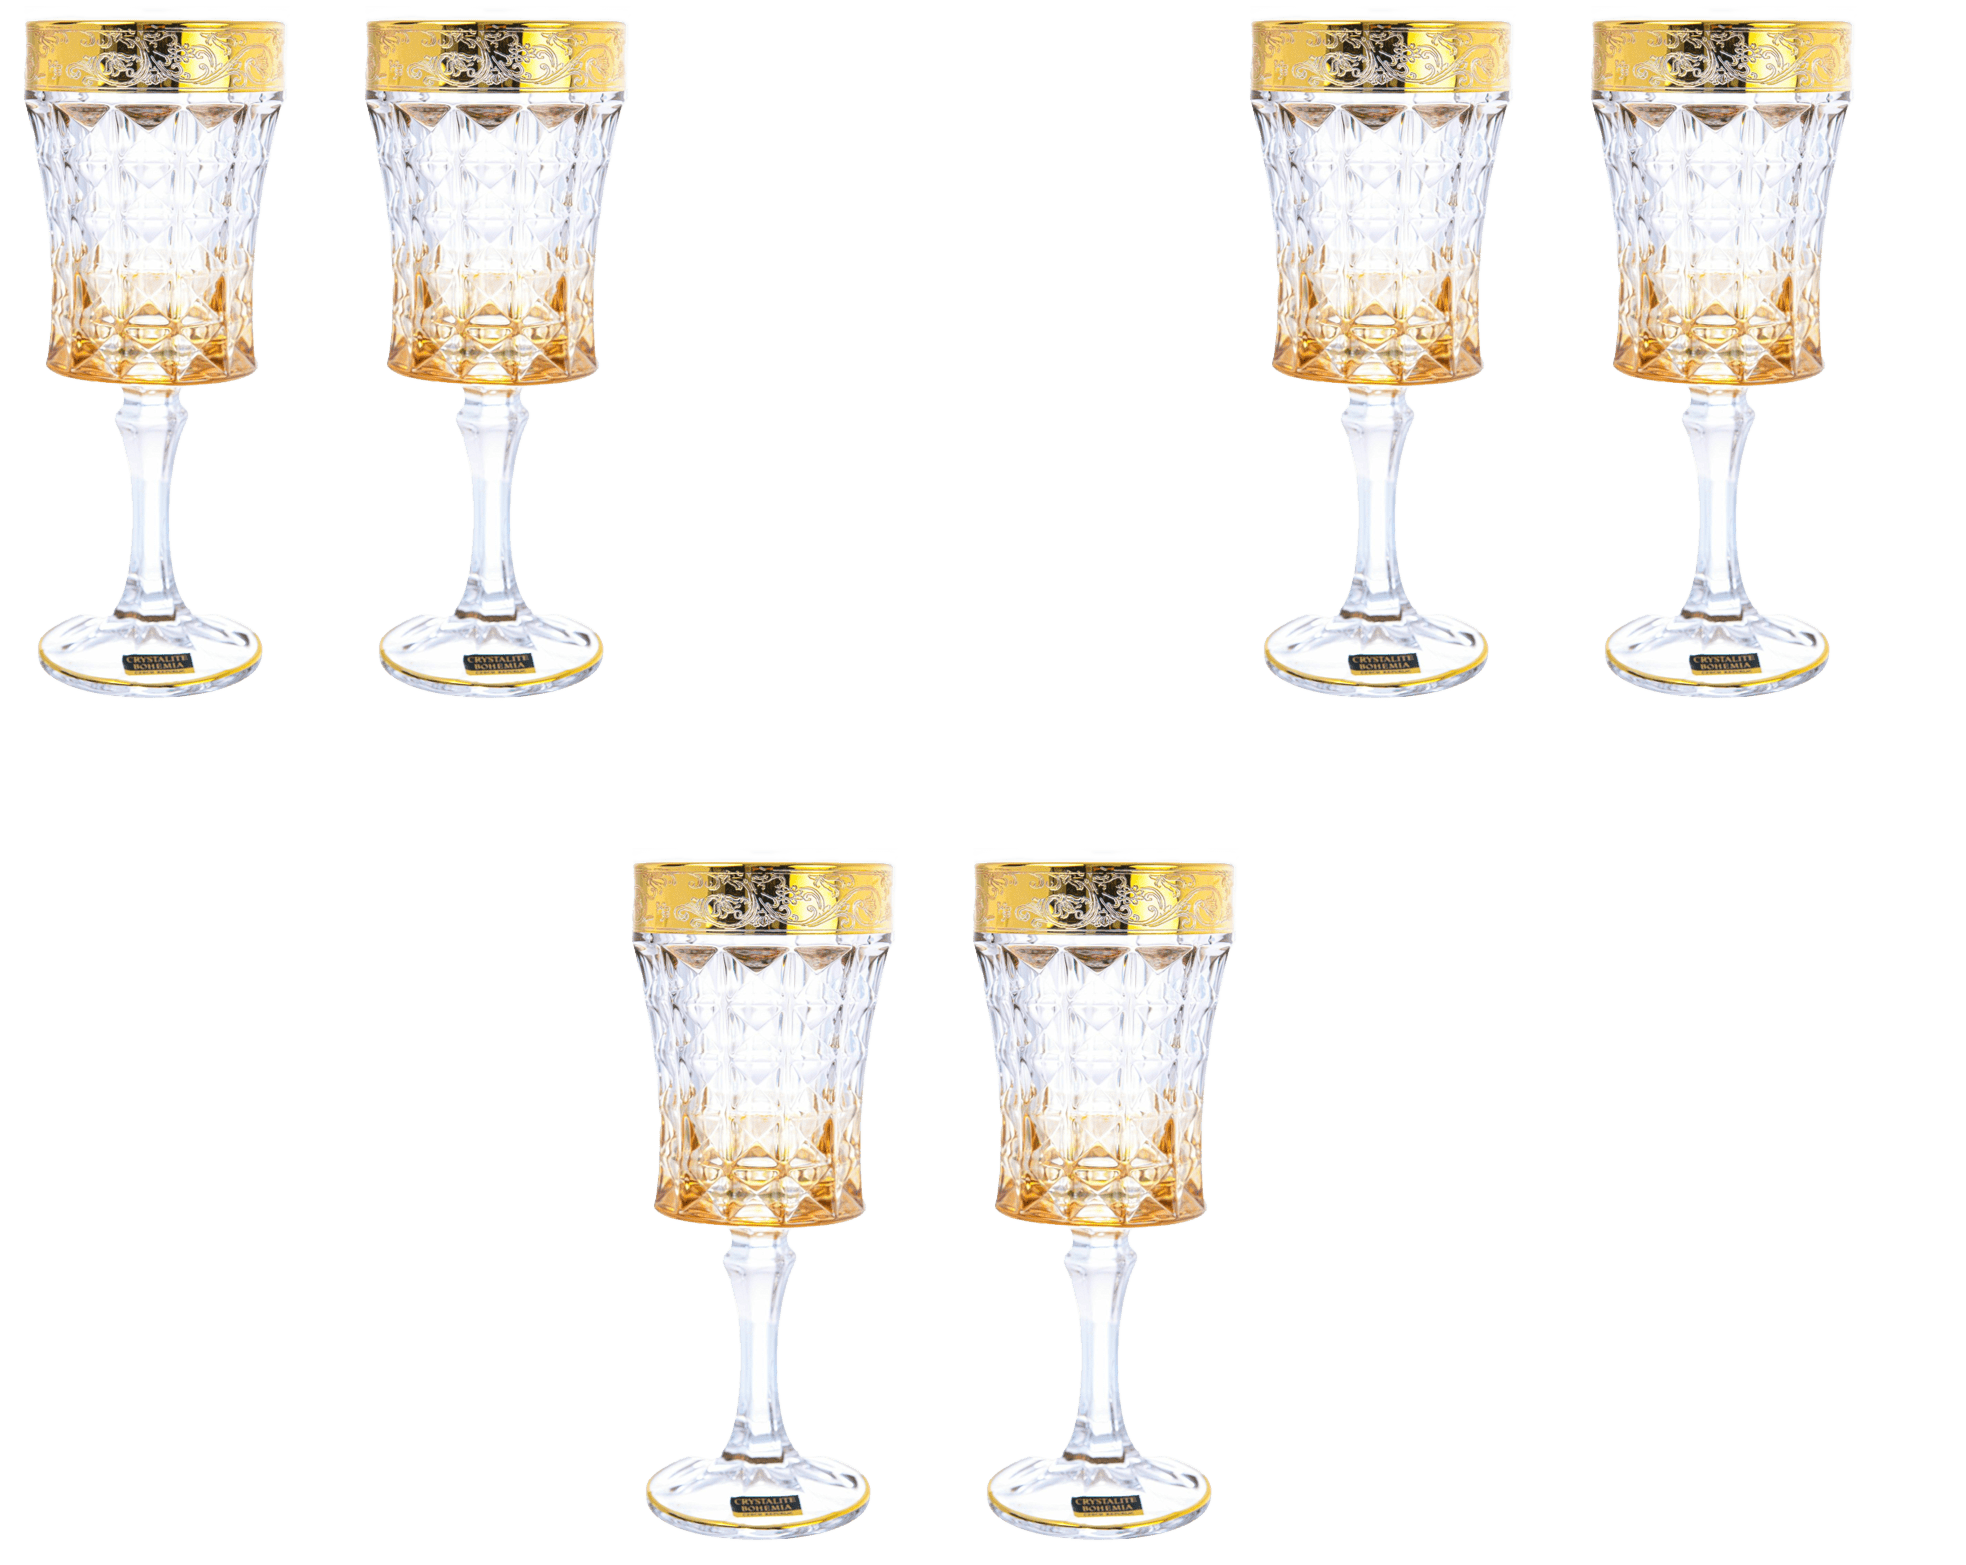 Bohemia Crystal - Goblet Glass Set 6 Pieces - Blue, Yellow & Gold - 200ml - 270006782